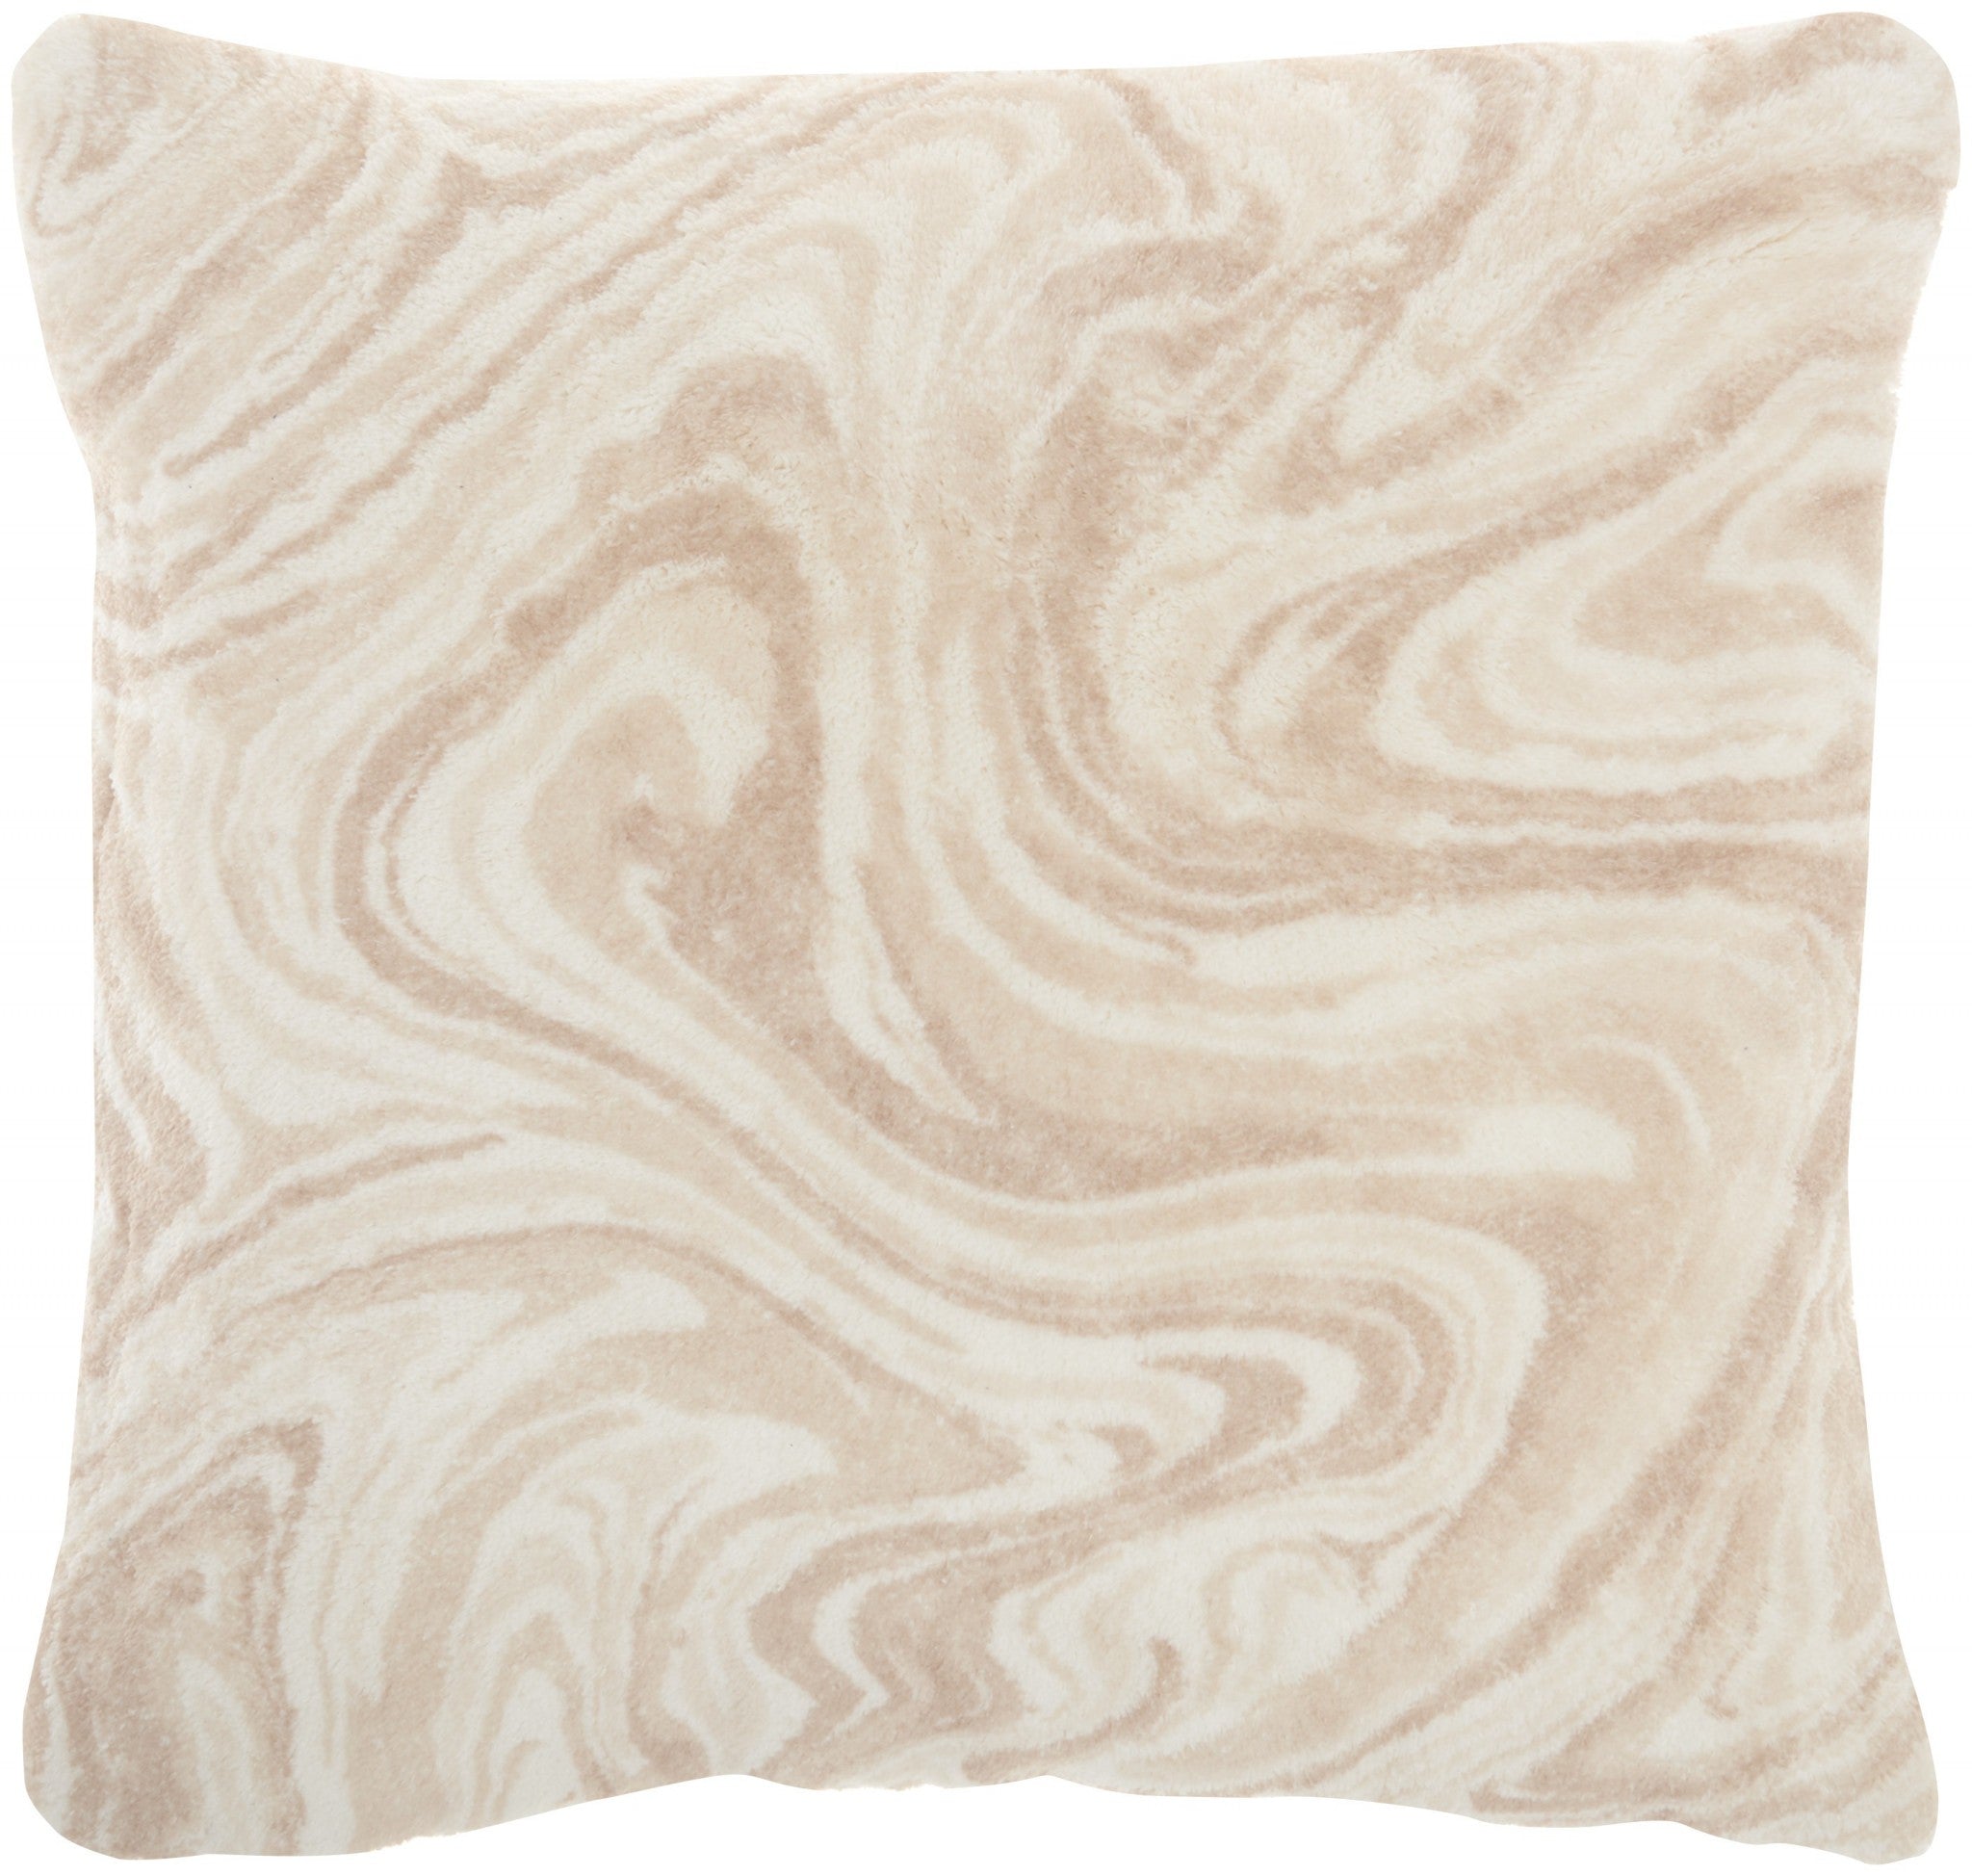 Cream Marble Patterned Throw Pillow - Team Spirit Store USA 